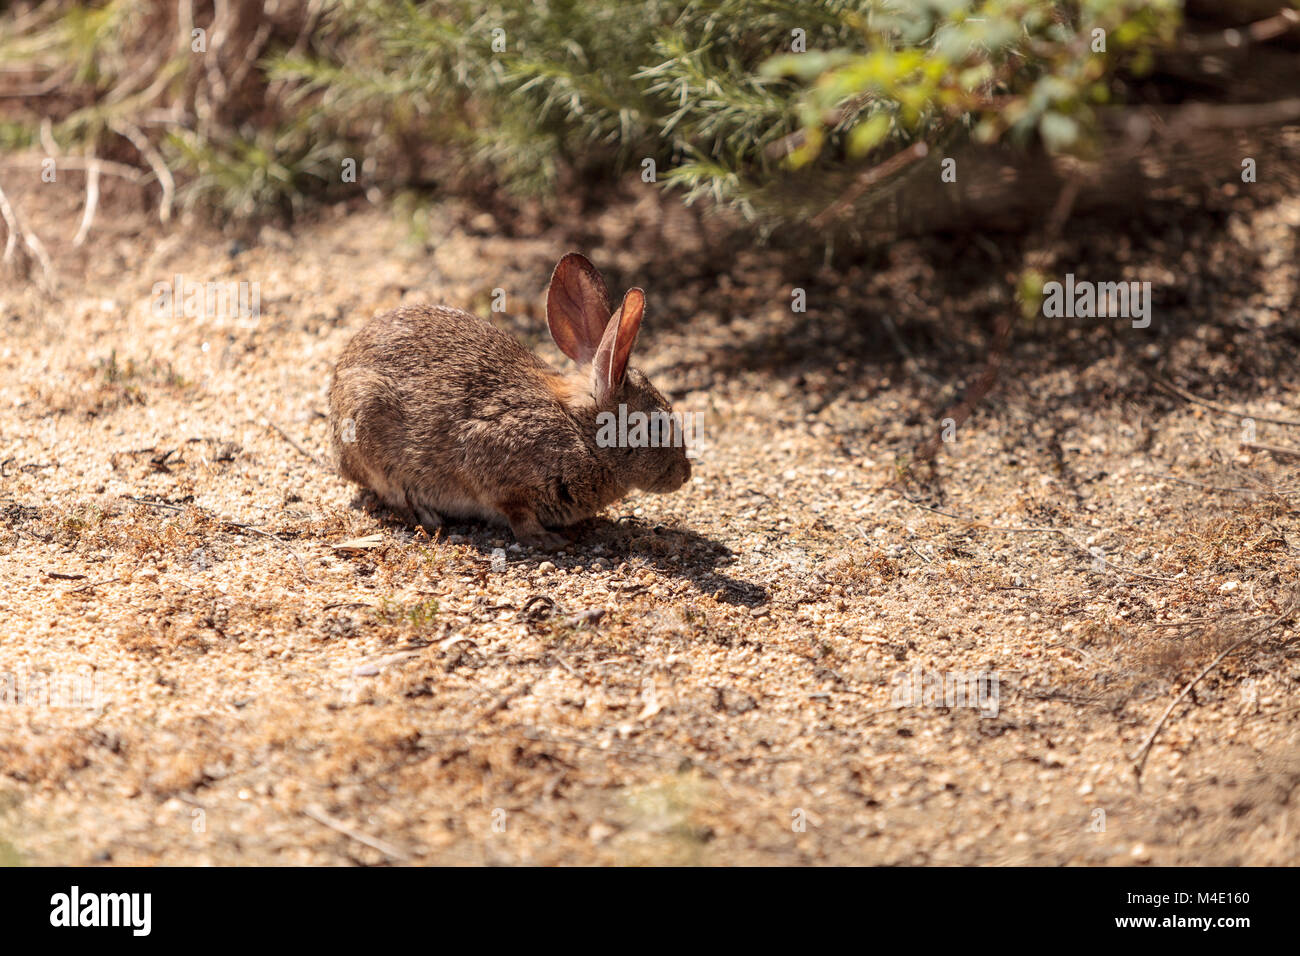 Sylvilagus bachmani juvénile, lapin, lapin brosse sauvages Banque D'Images